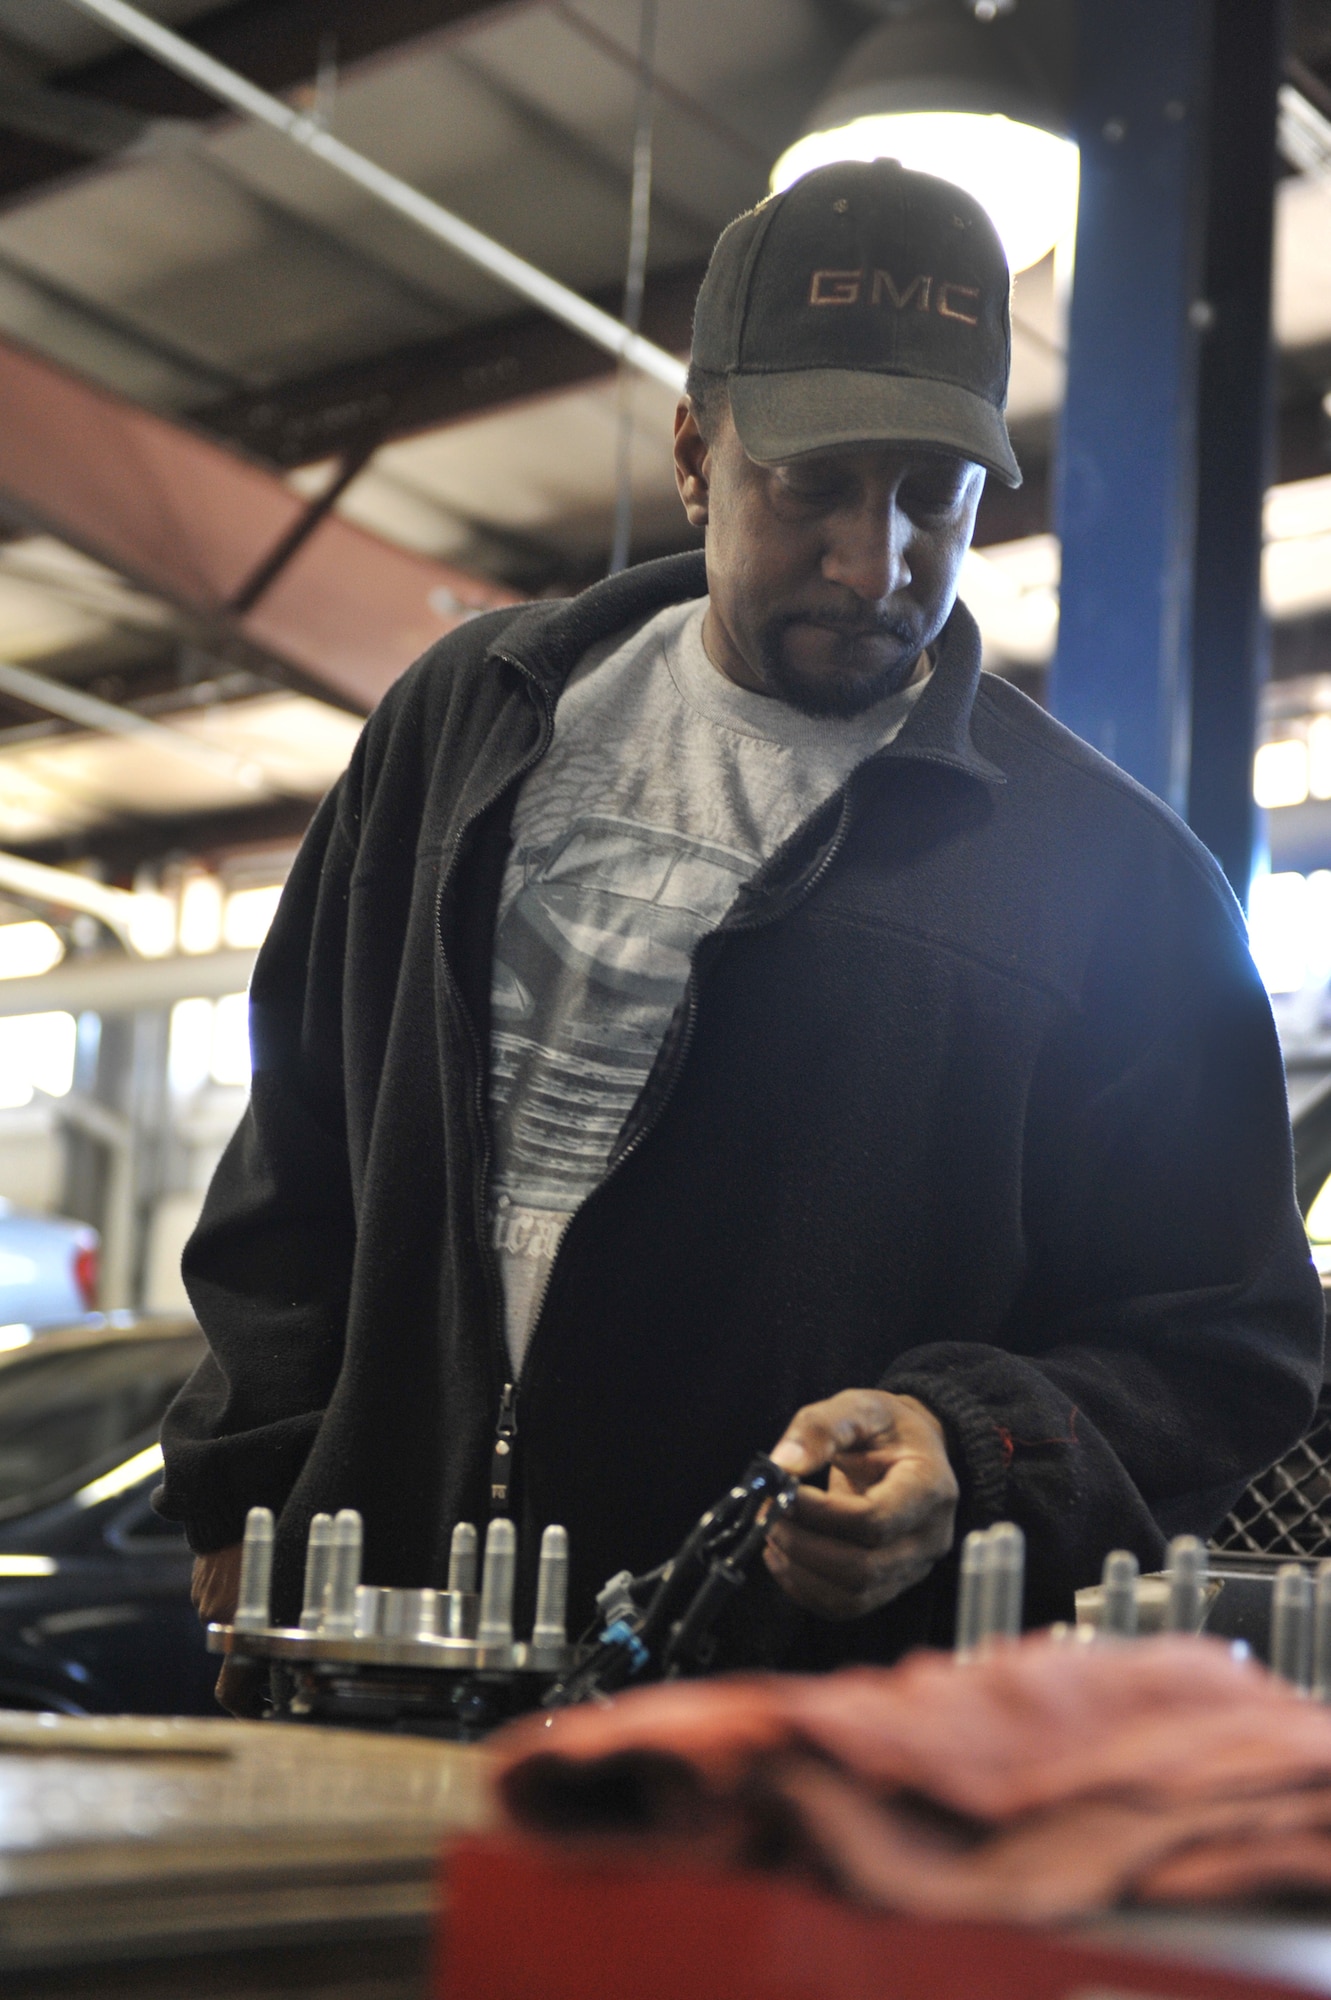 James Bell, an aviation electronics technician, prepares to replace the hubs on a truck at Spirit Auto, Whiteman Air Force Base, Mo., March 13, 2013. Spirit Auto offers an array of automotive services for Team Whiteman members. (U.S. Air Force photo by Heidi Hunt/Released) 